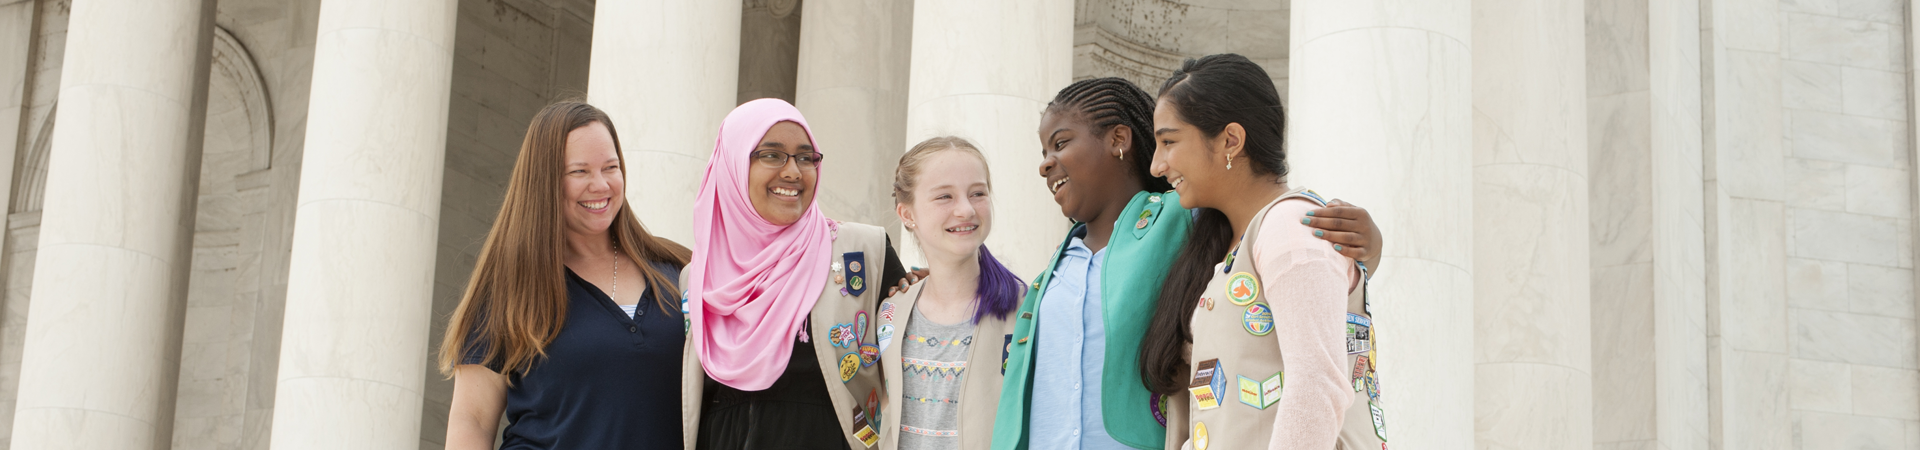  group of girl scouts smiling 